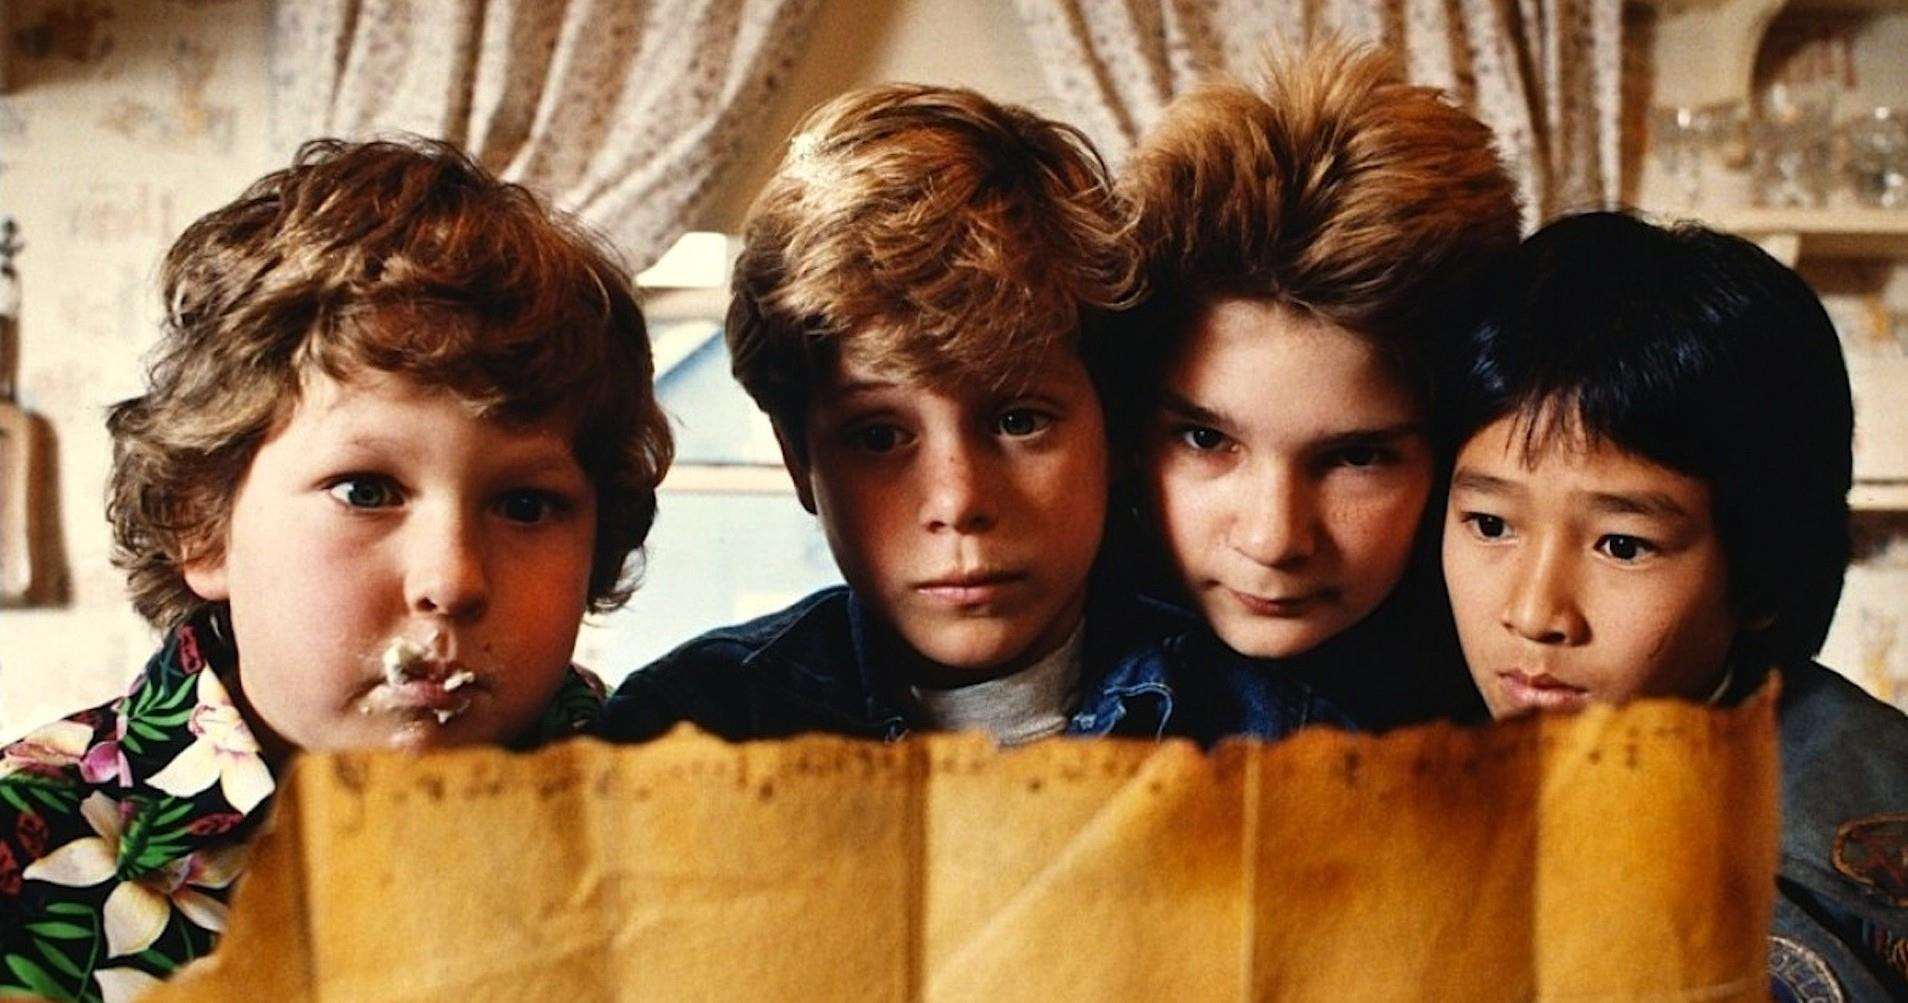 Step back to the 80s with The Goonies Picture courtesy of Warner BrosCategory